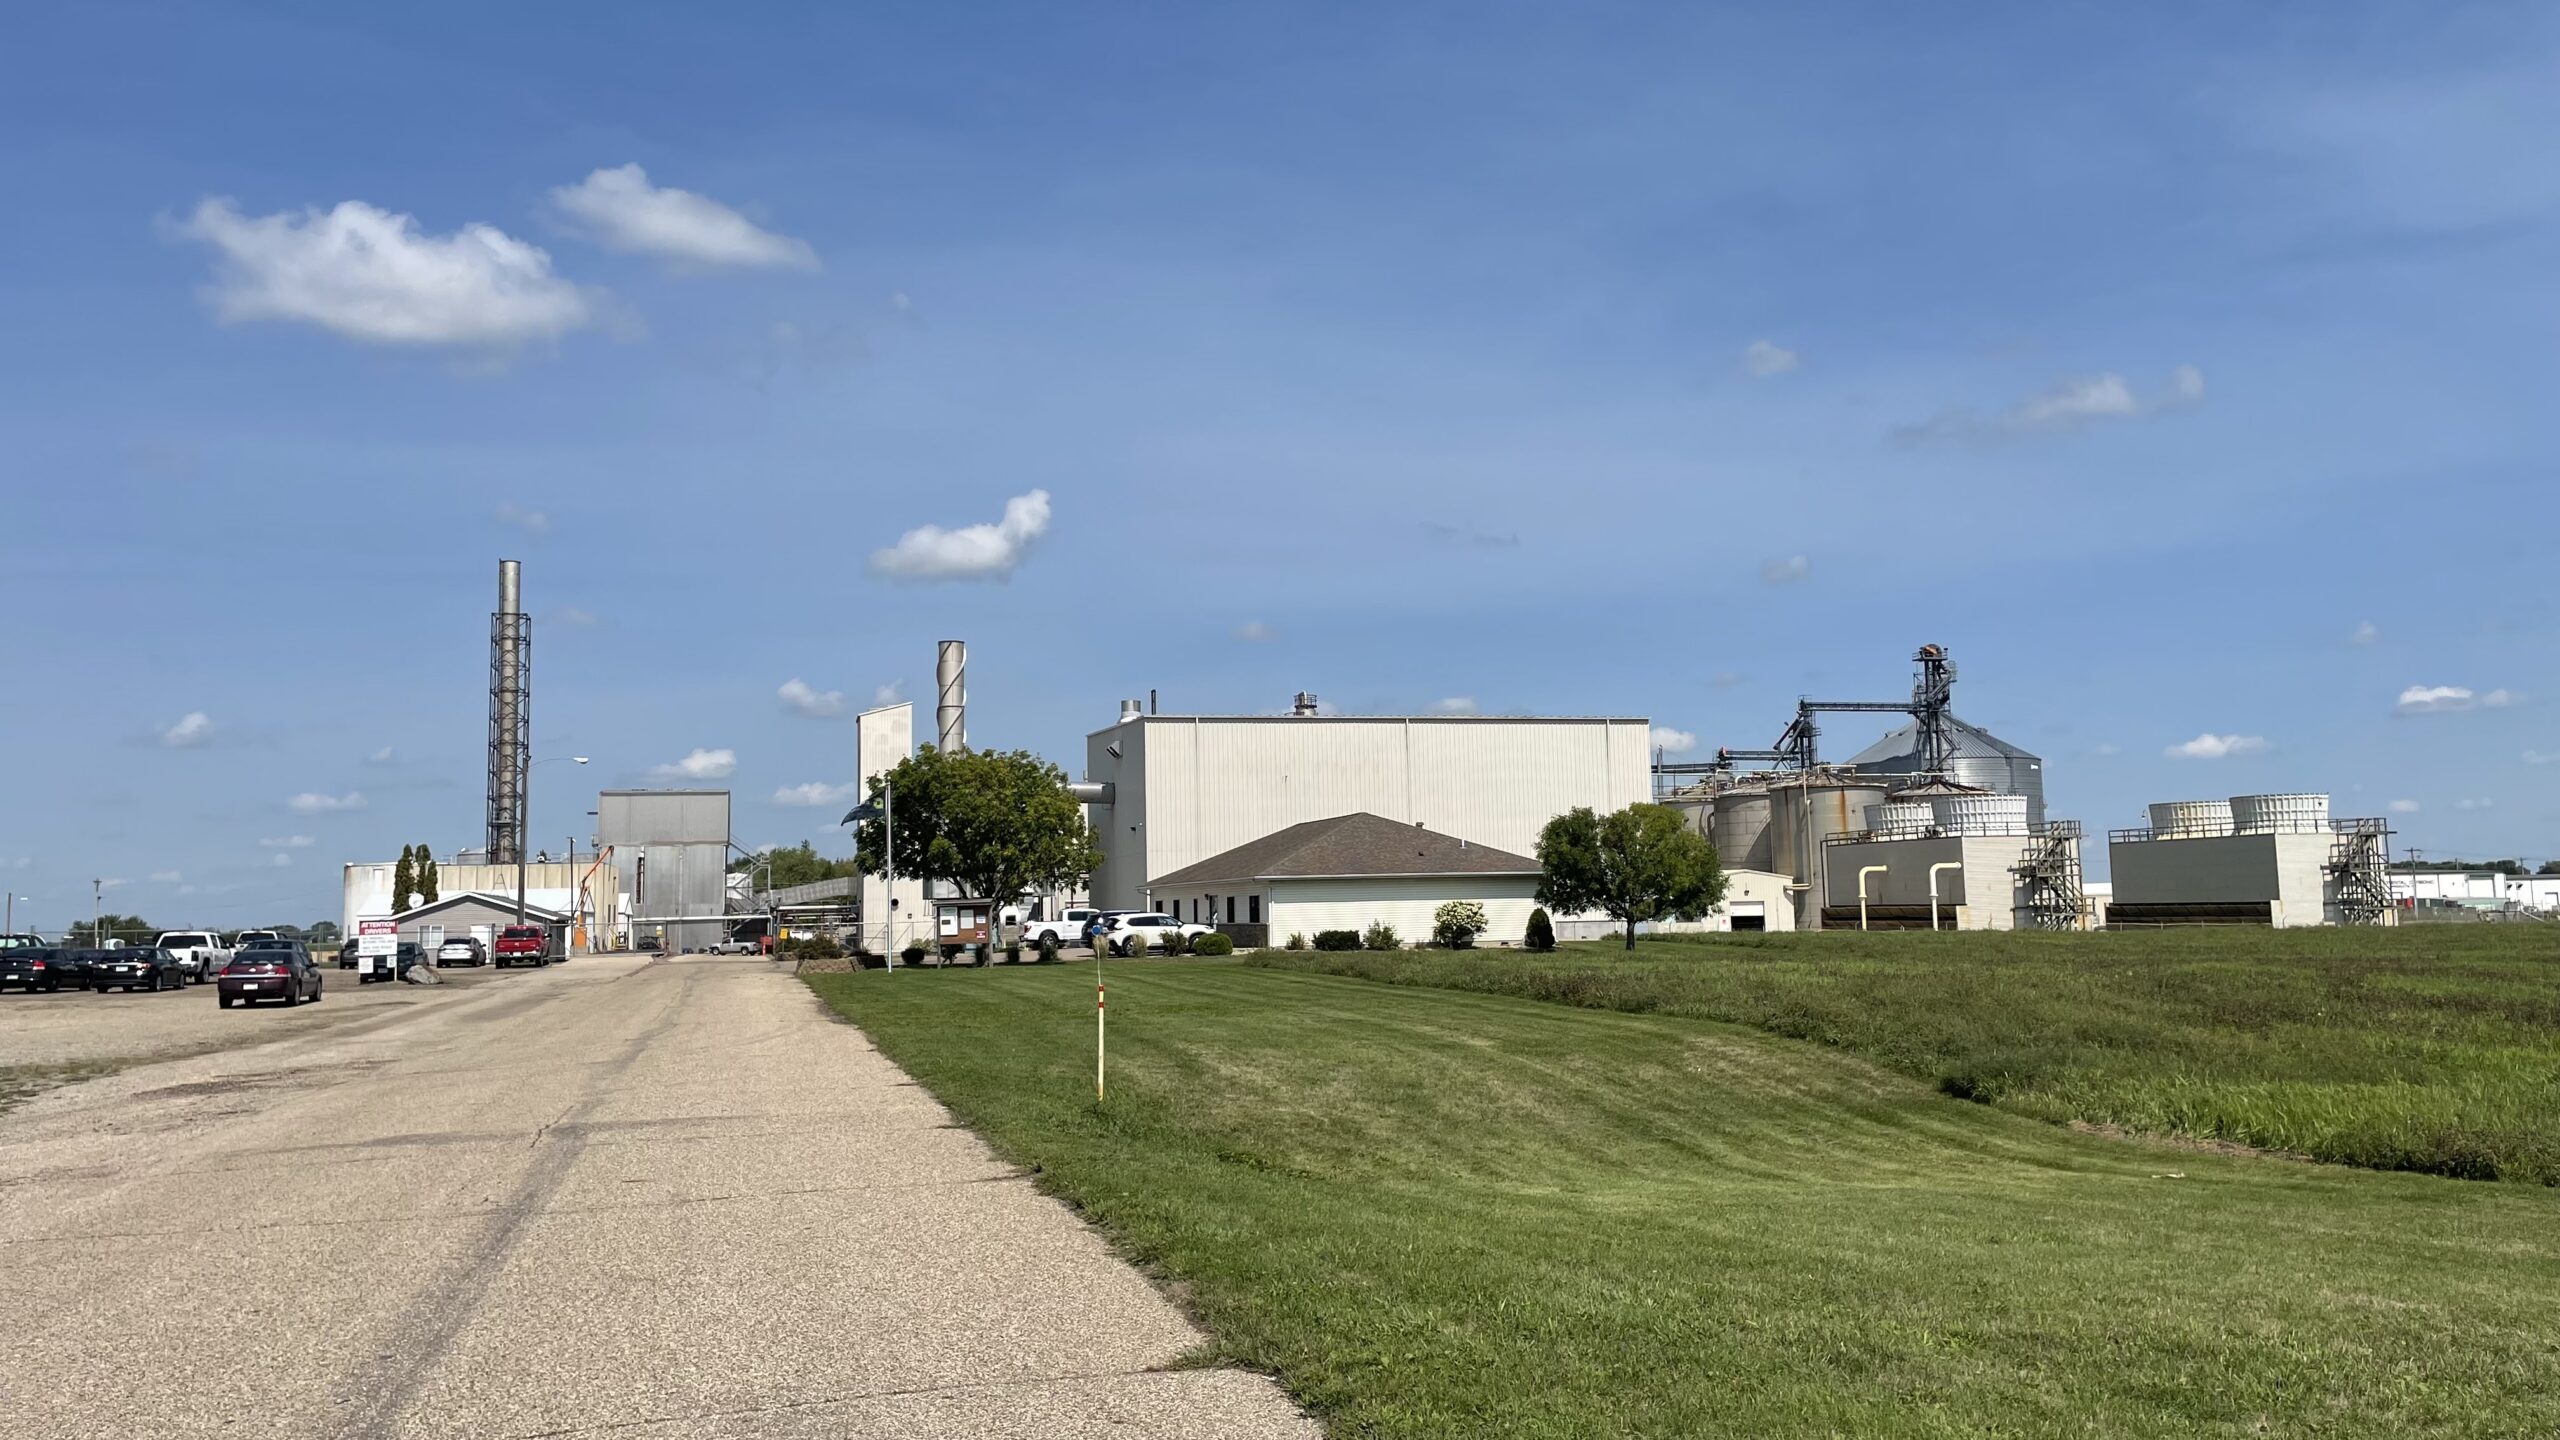 GREENFIELD GLOBAL TO ADD 48 MILLION GALLONS TO BIOFUELSPRODUCTION WITH ACQUISITION OF MINNESOTA FUEL ETHANOL PLANT